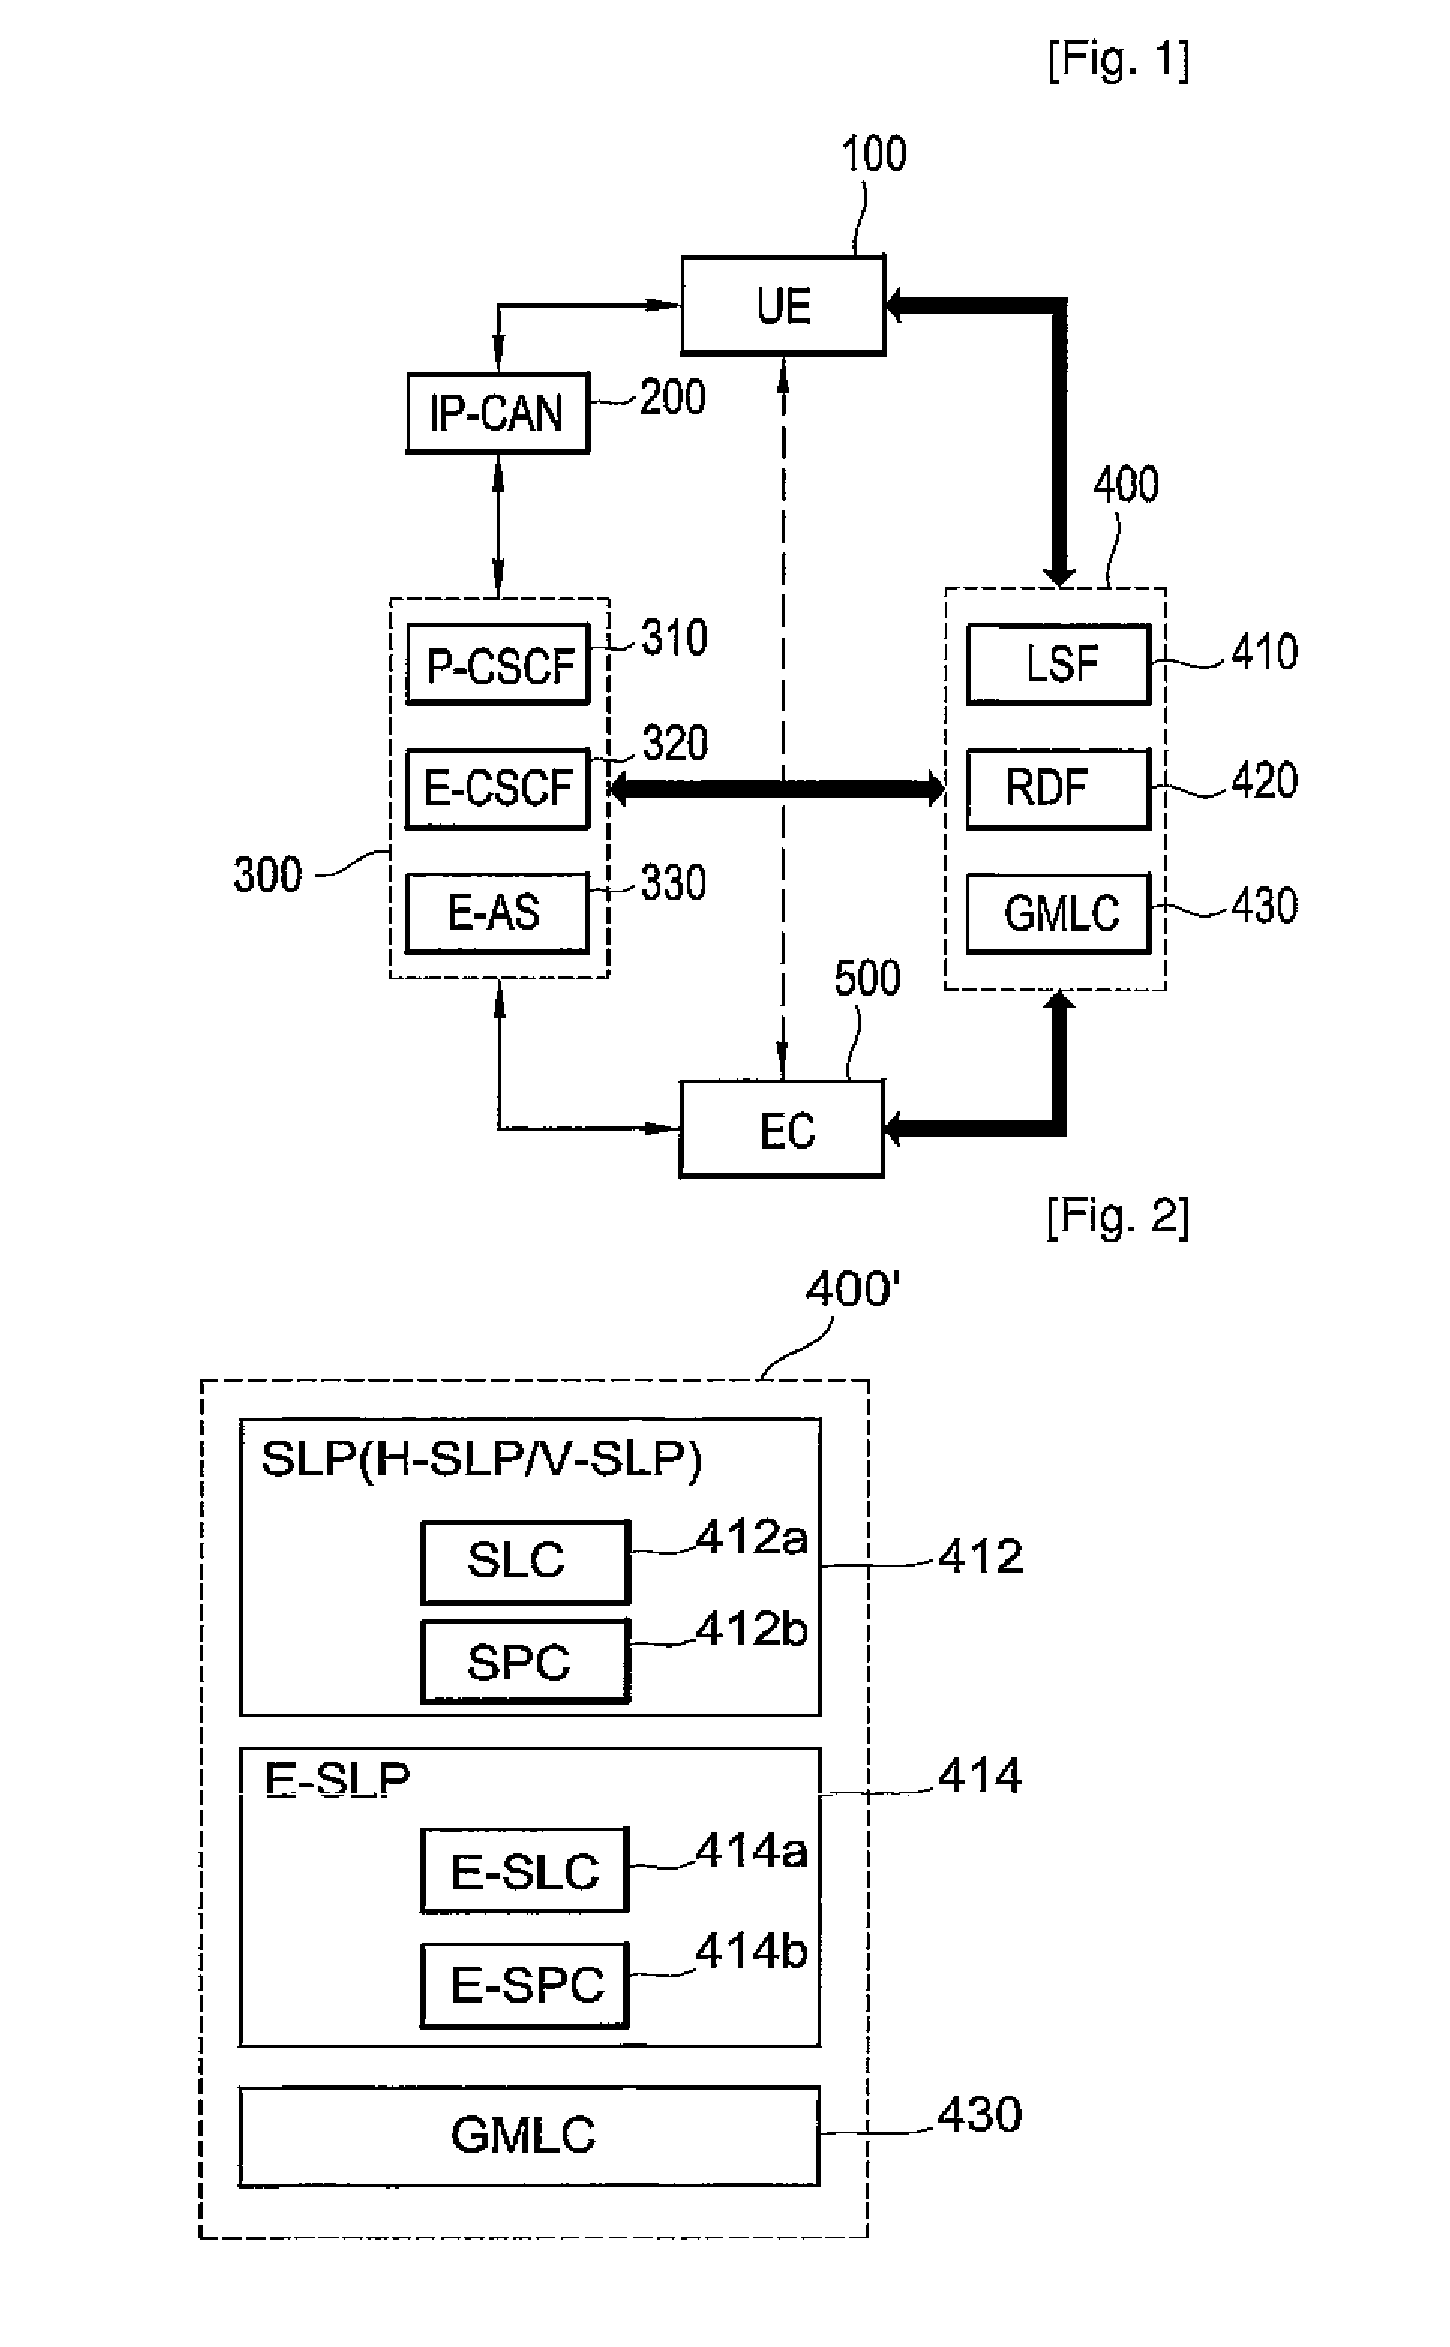 Method and System for Providing an Emergency Location Service